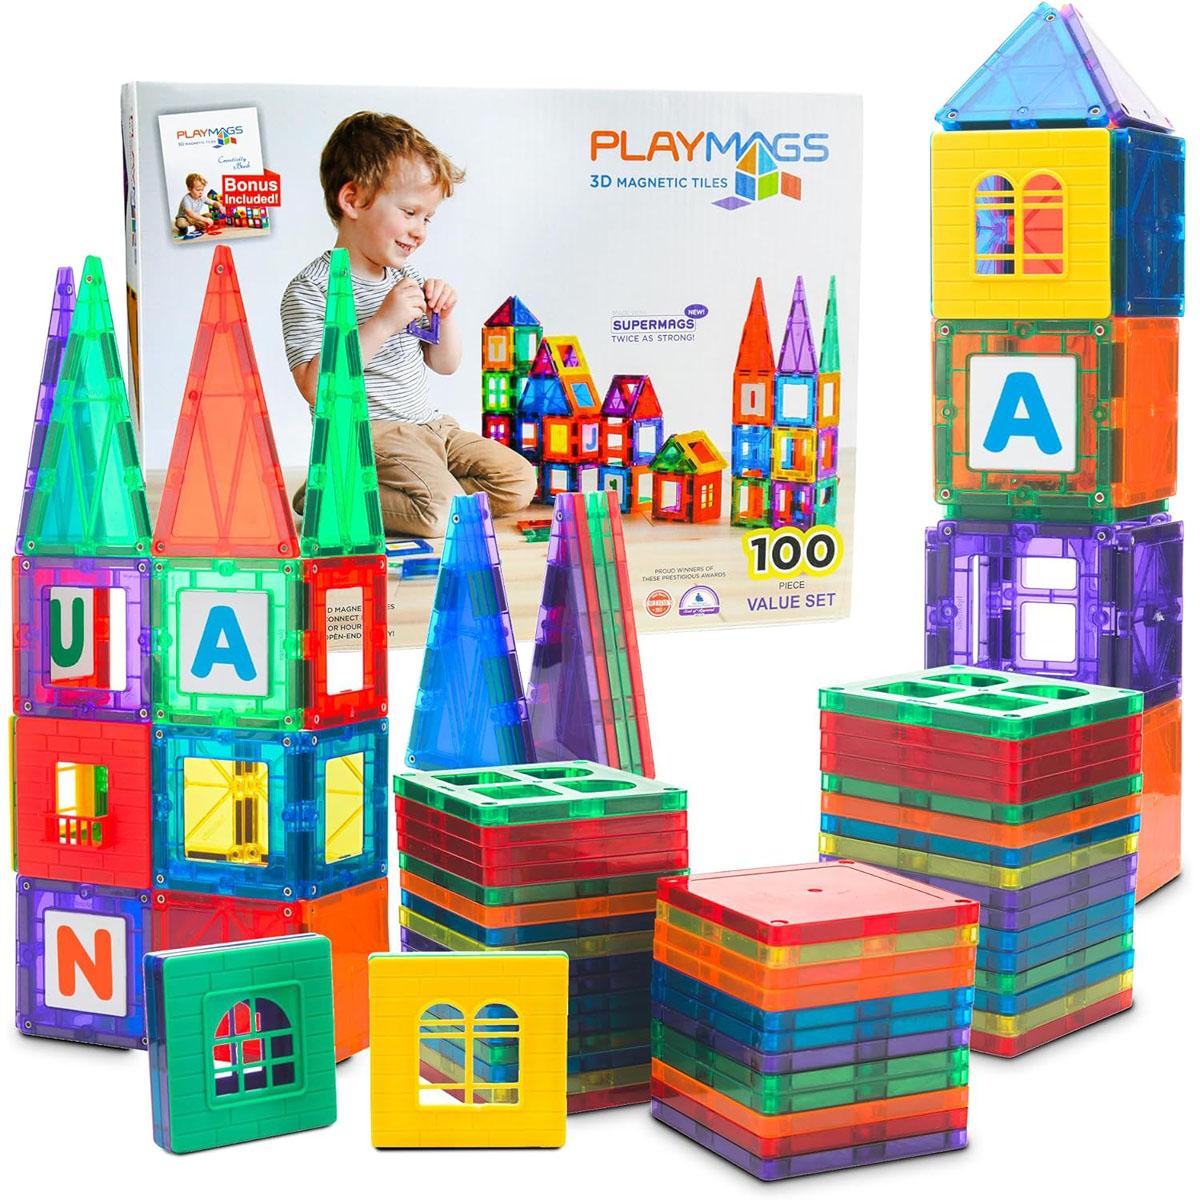 100-Piece Playmags 3D Magnetic Tiles Building Blocks Set for $29.65 Shipped